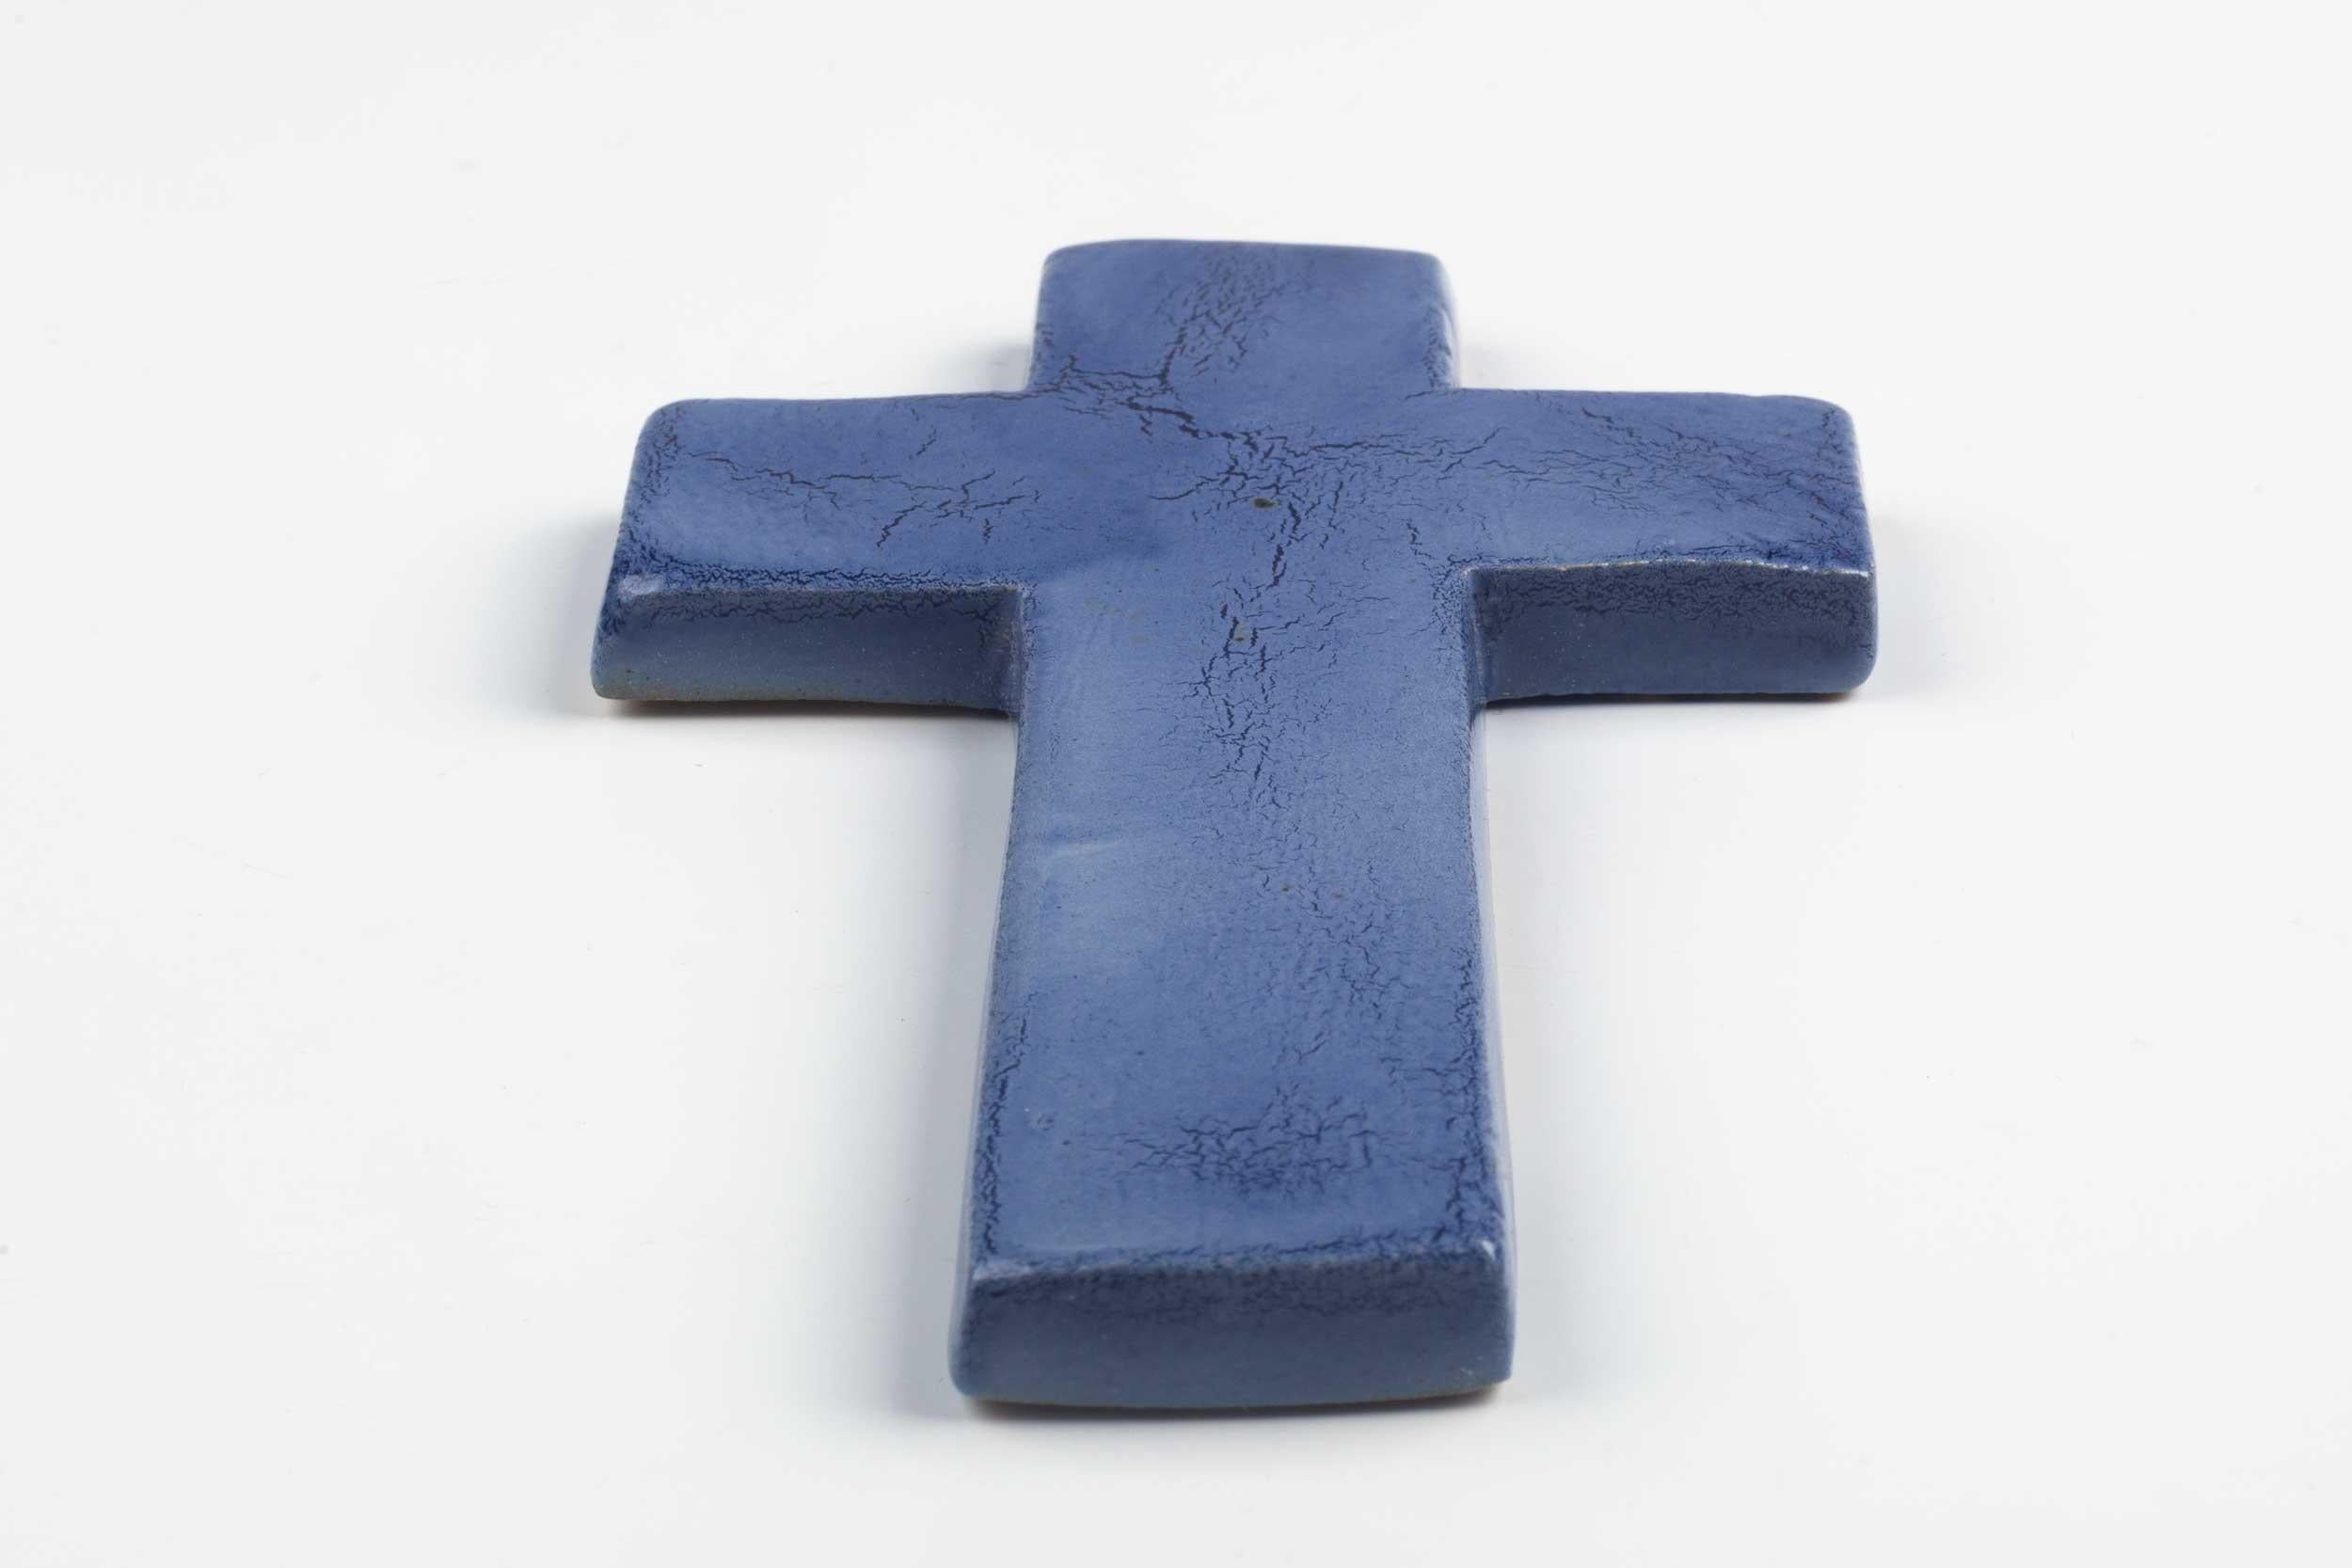 Midcentury European ceramic wall cross in lavender with crackle effect glaze. From a large collection of vintage crosses handmade by Flemish artisans. 

From modernism to brutalism, the crosses in our collection range from being as futurist as a